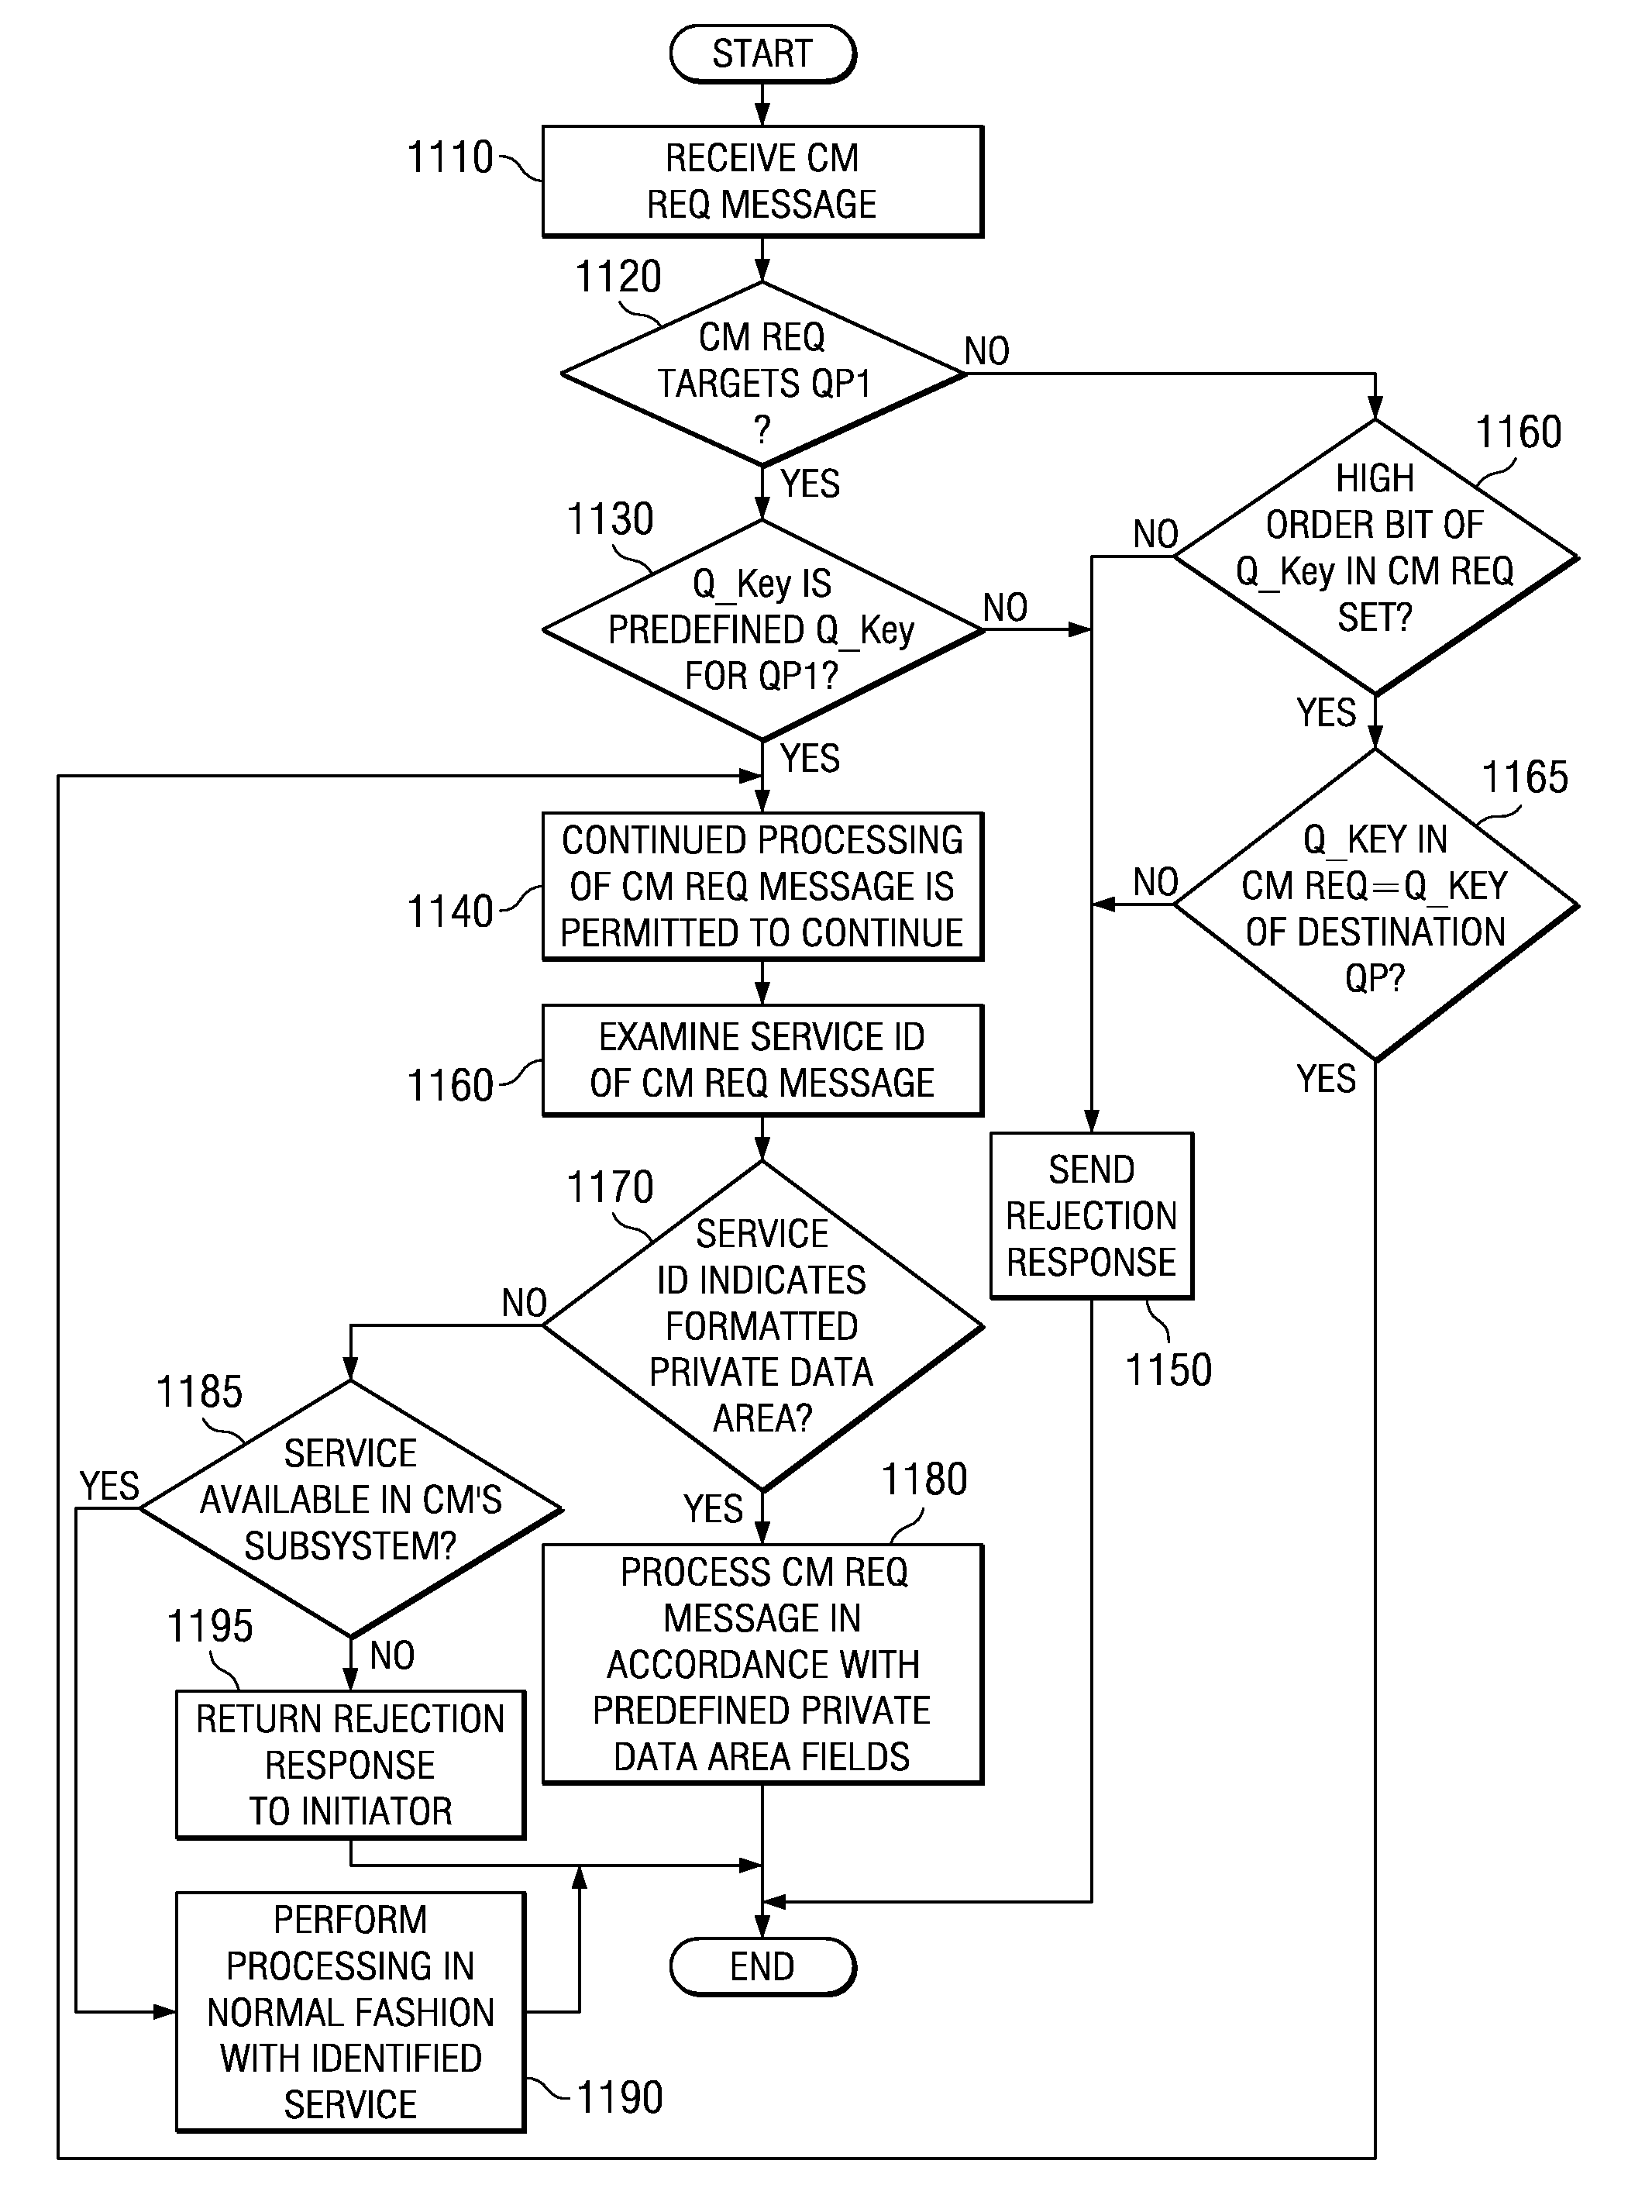 Preventing IP spoofing and facilitating parsing of private data areas in system area network connection requests